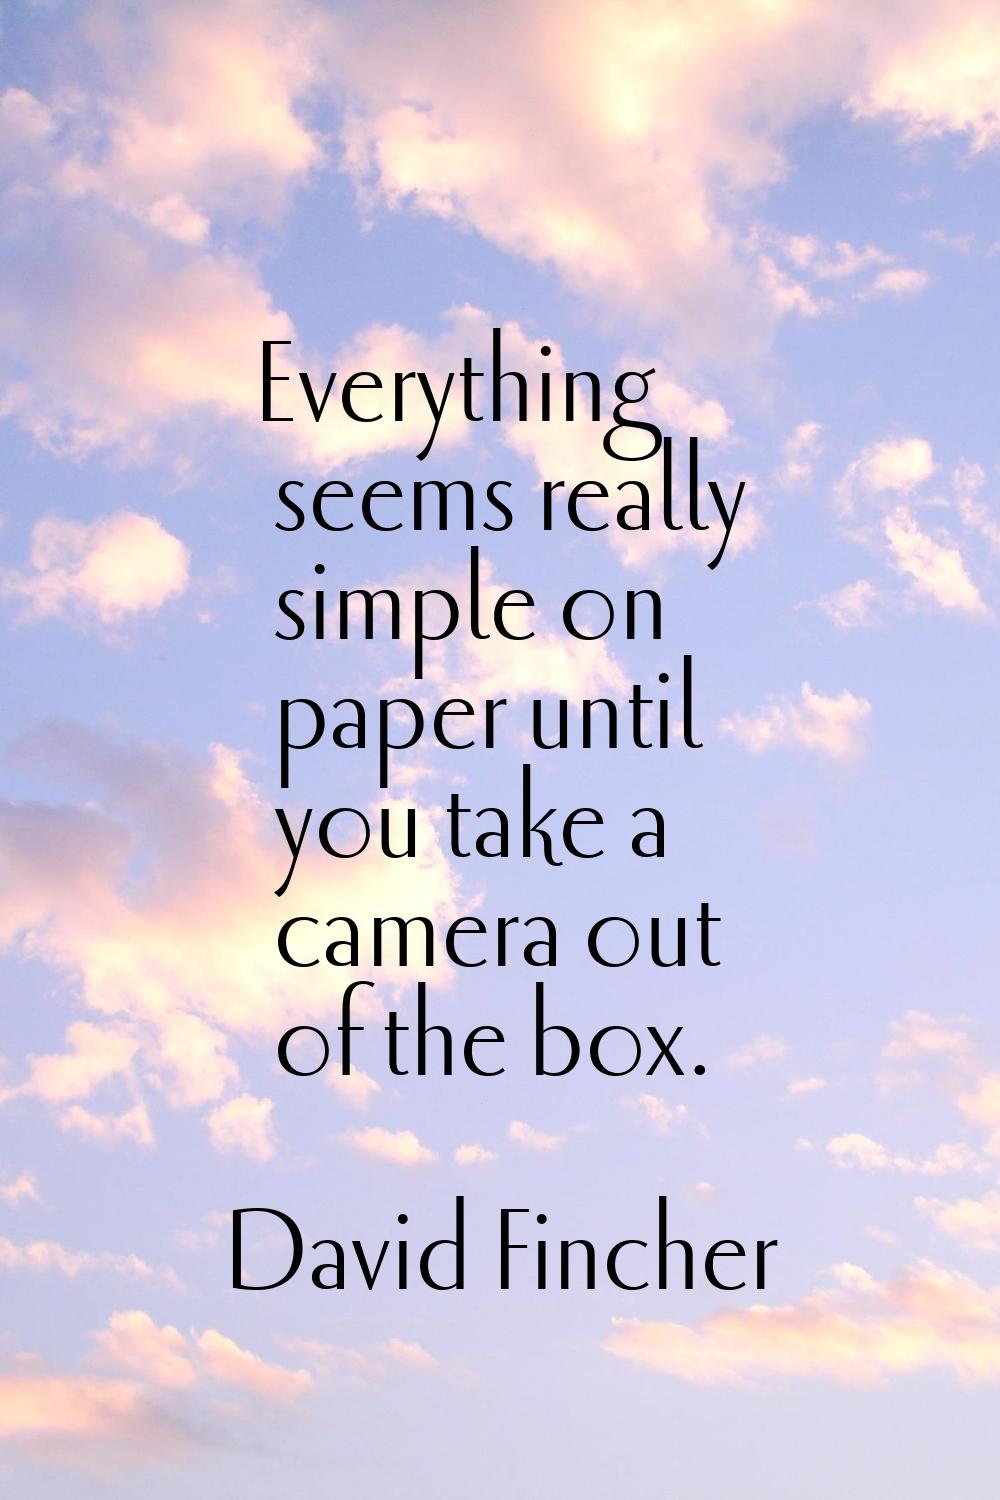 Everything seems really simple on paper until you take a camera out of the box.